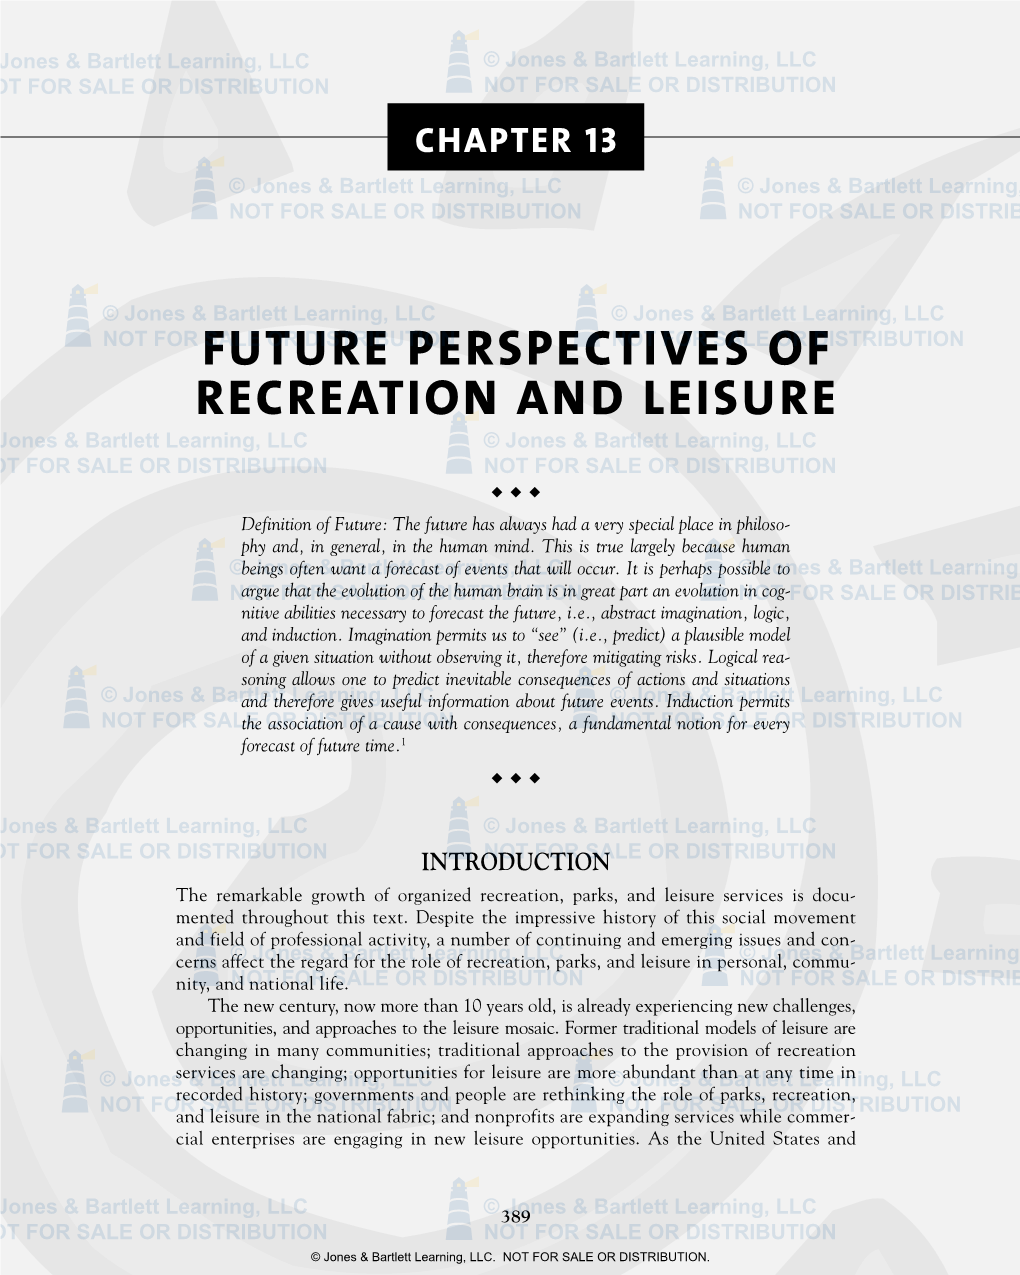 Chapter 13 Future Perspectives of Recreation and Leisure